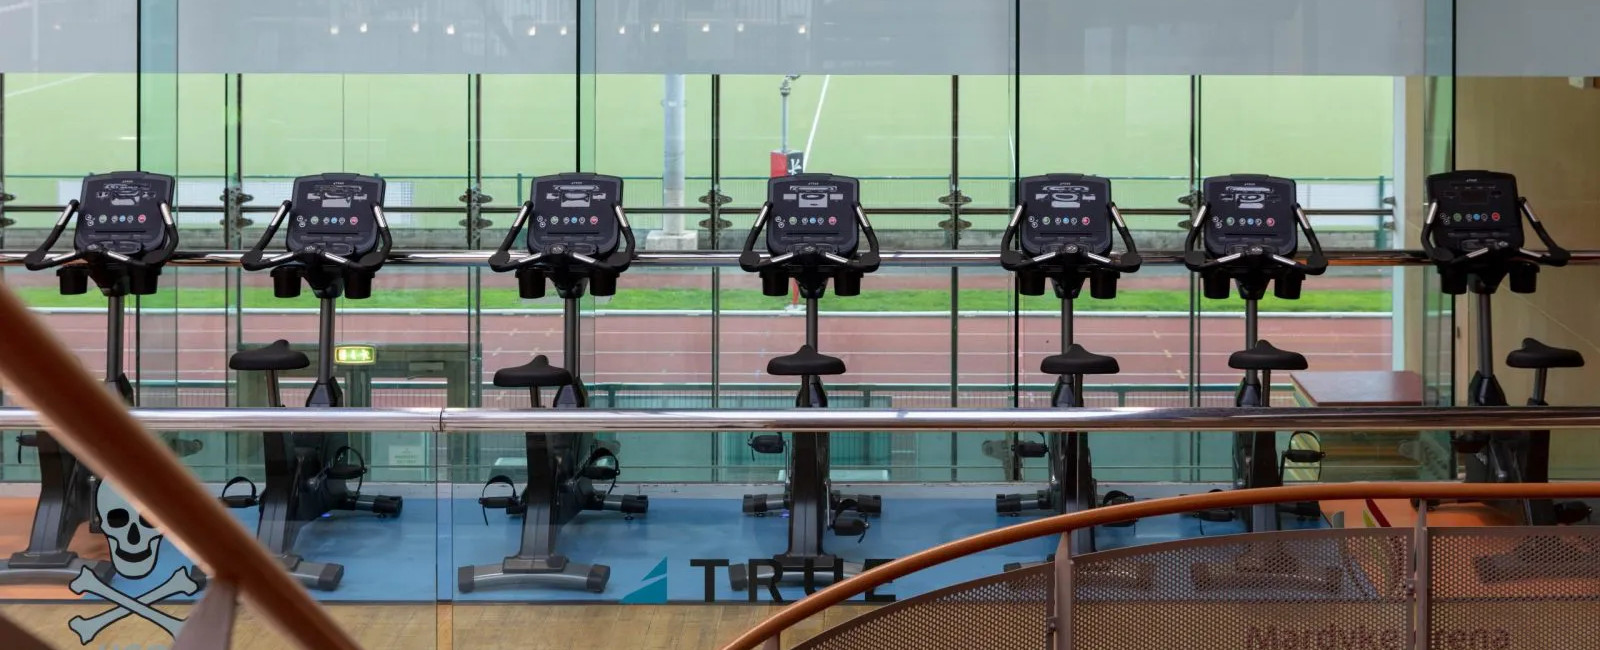 cycling machines on a glass balcony at the mardyke arena